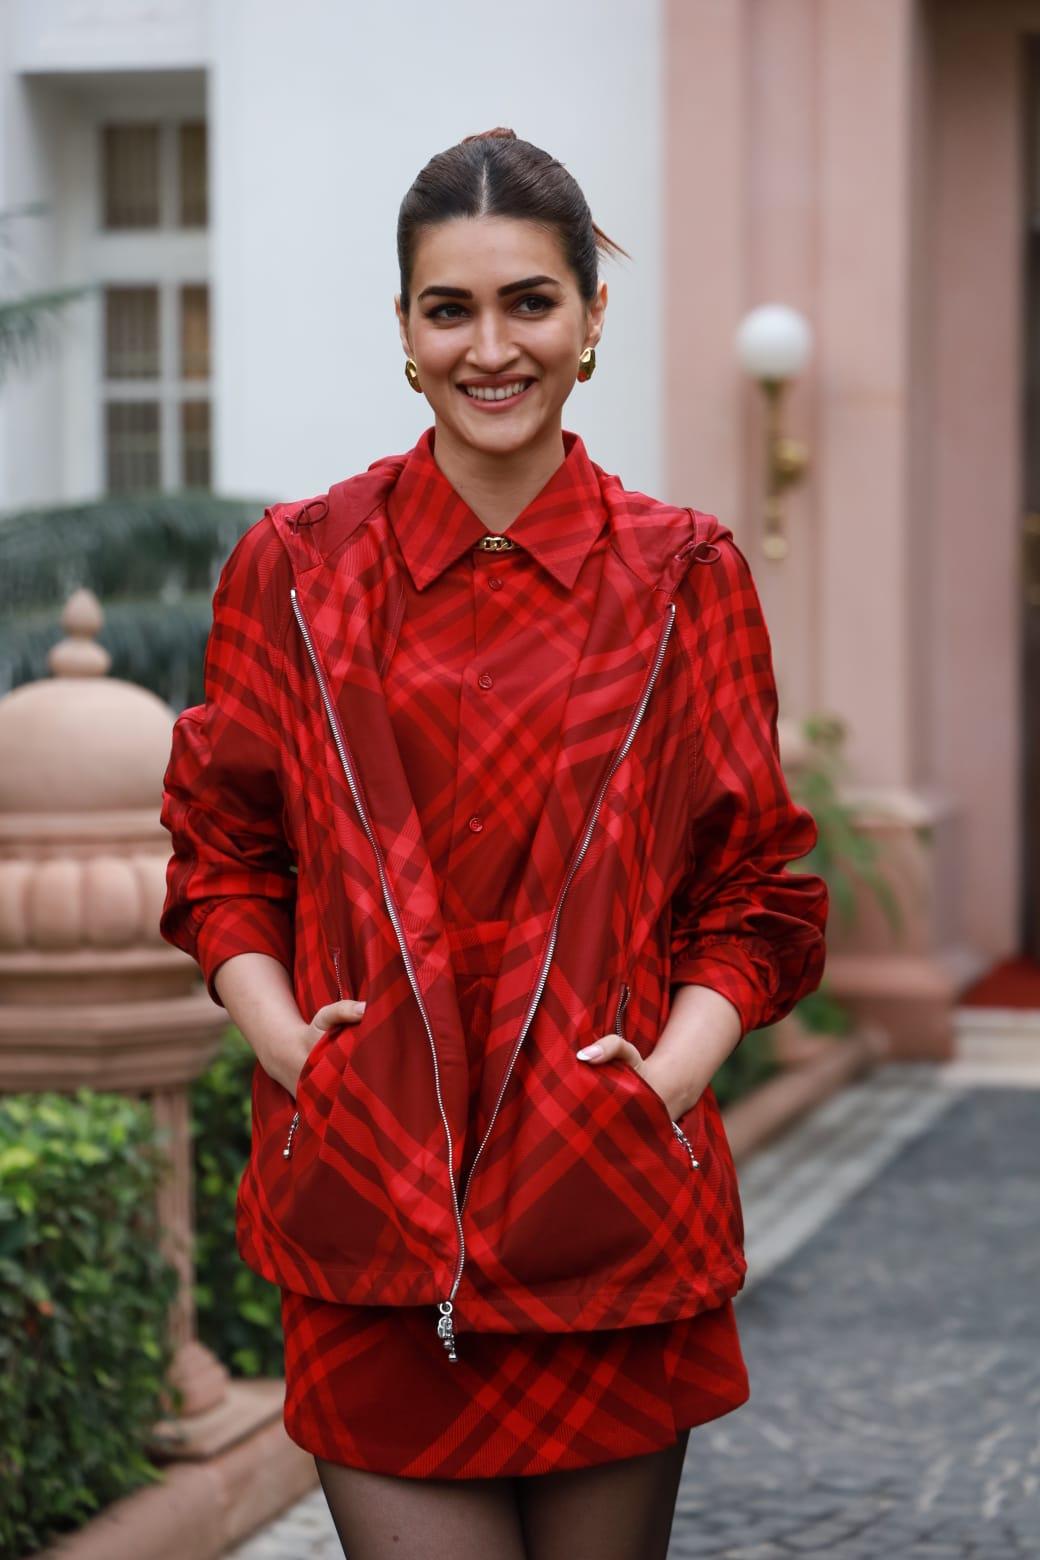 Kriti Sanon was clicked in a red plaid outfit as she promoted 'Teri Baaton Mein Aisa Uljha Jiya'